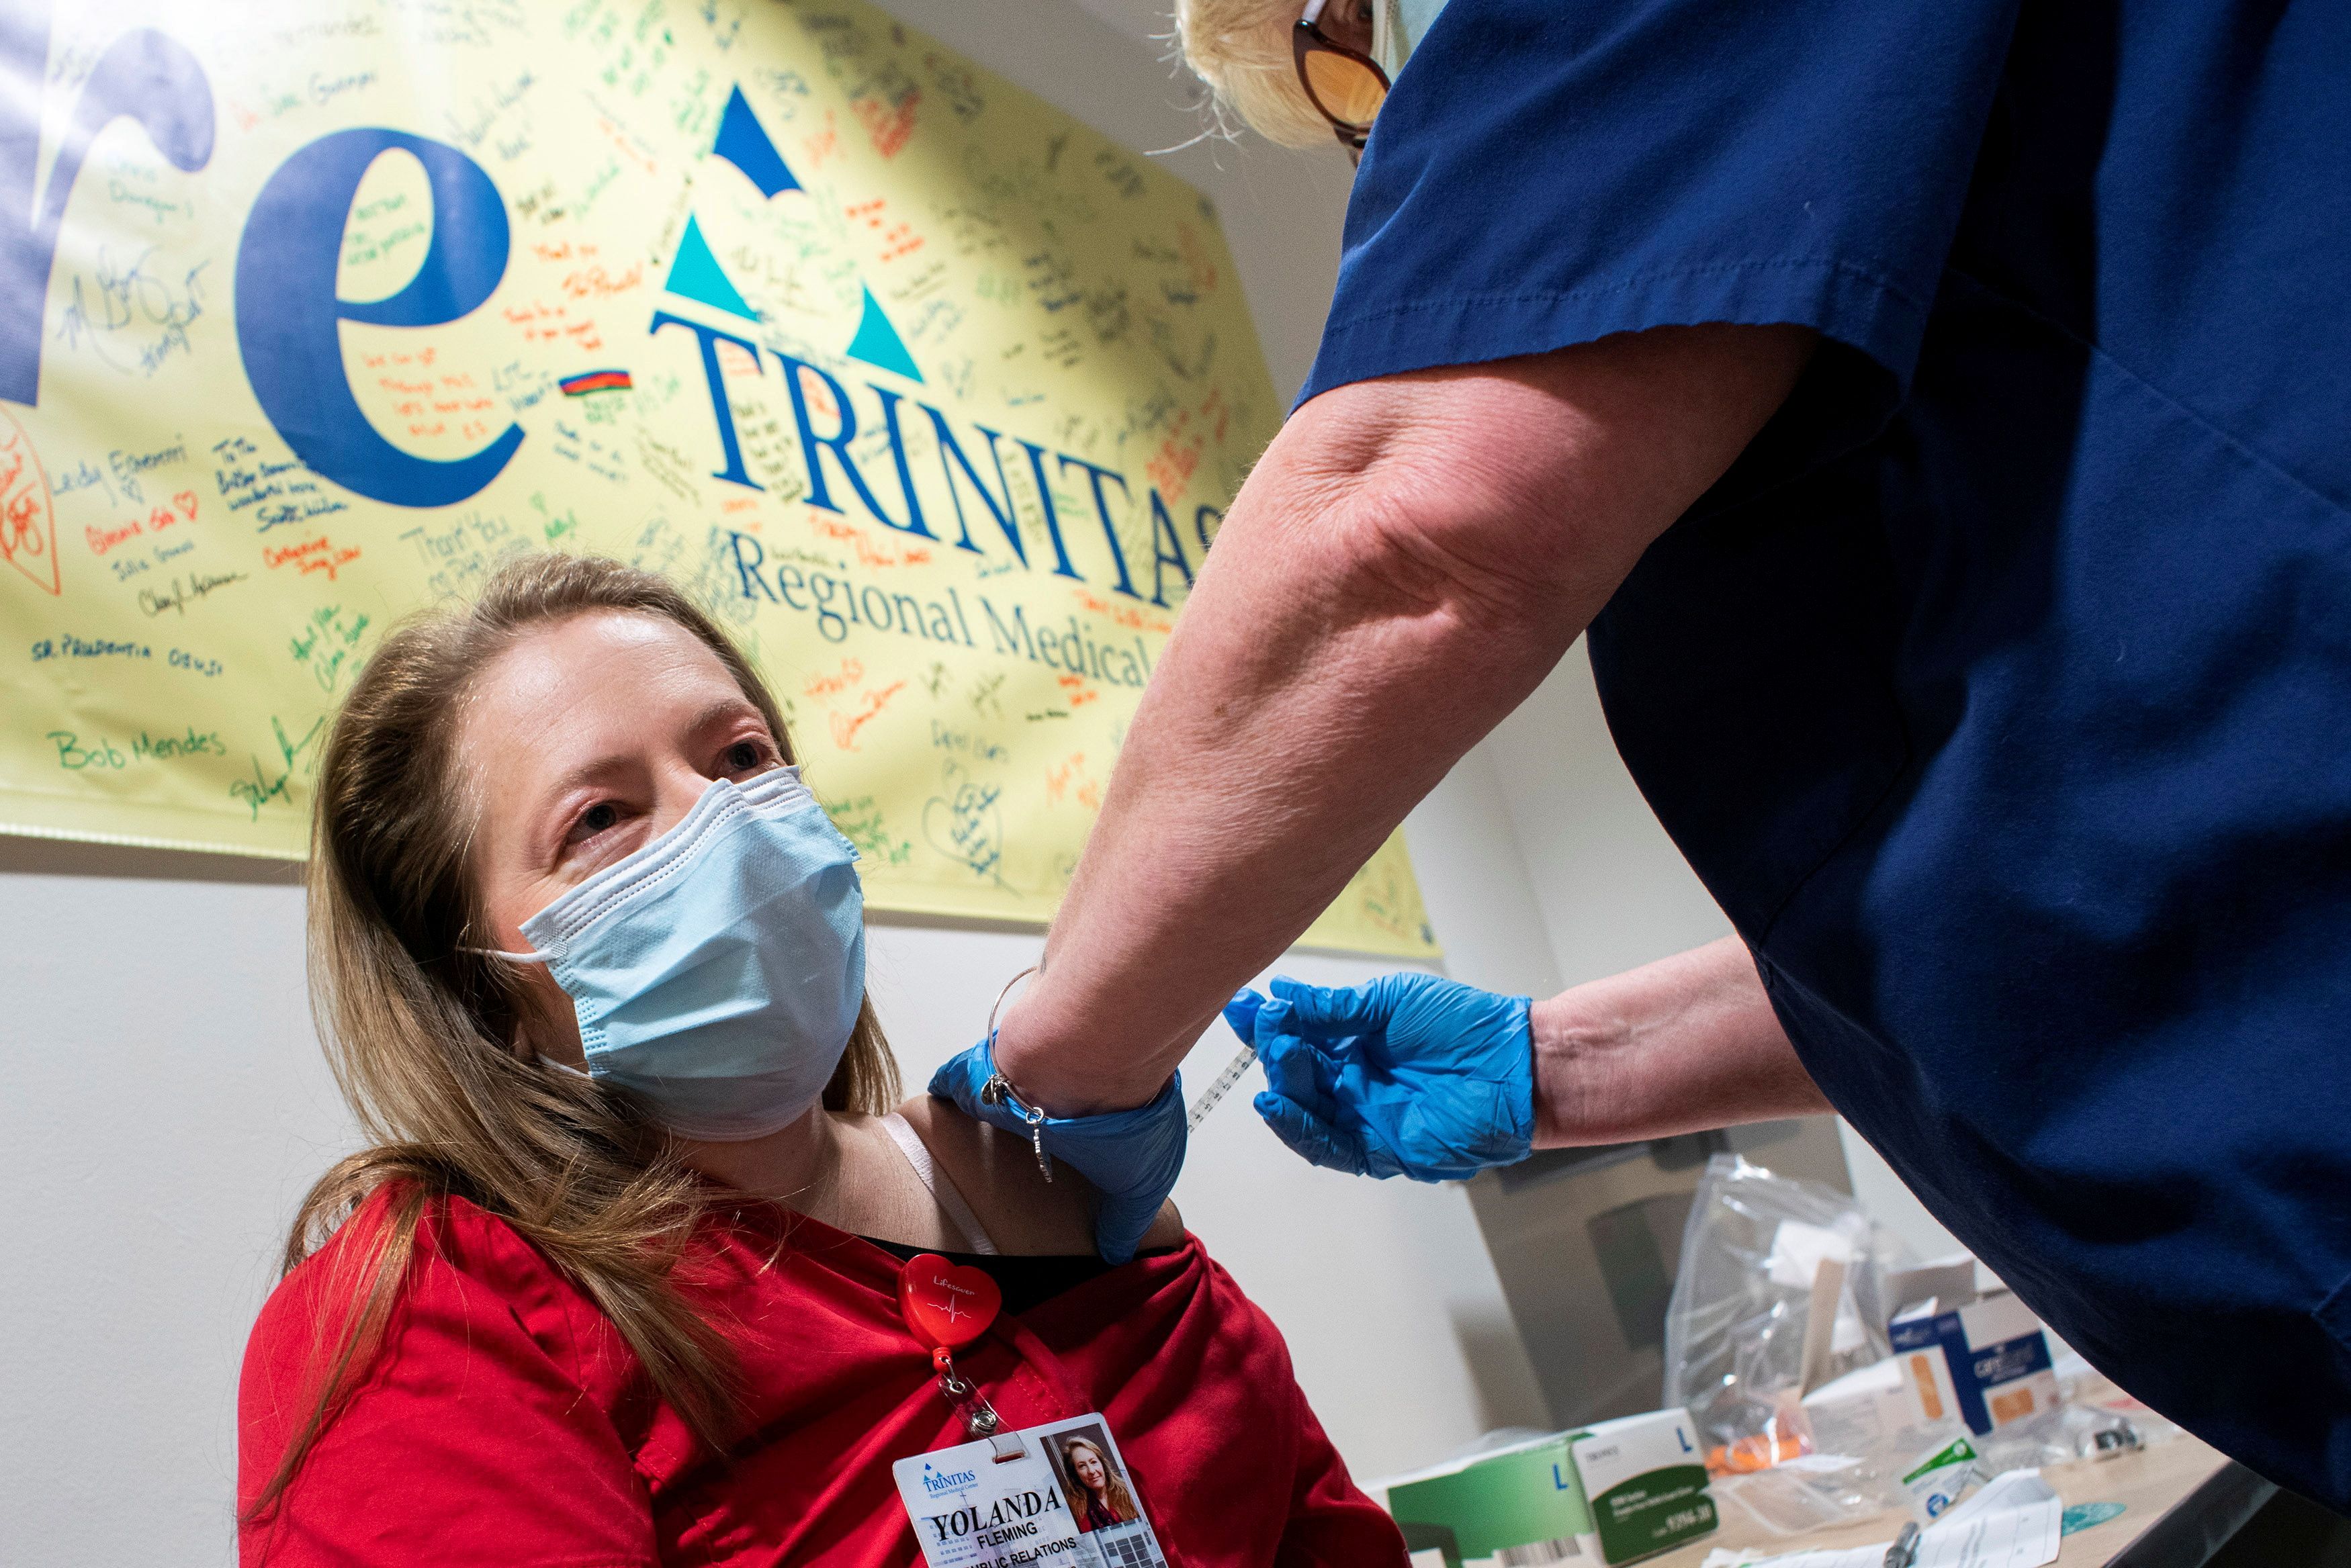 A healthcare worker gets vaccinated at the Trinitas Regional Medical Center in Elizabeth, New Jersey